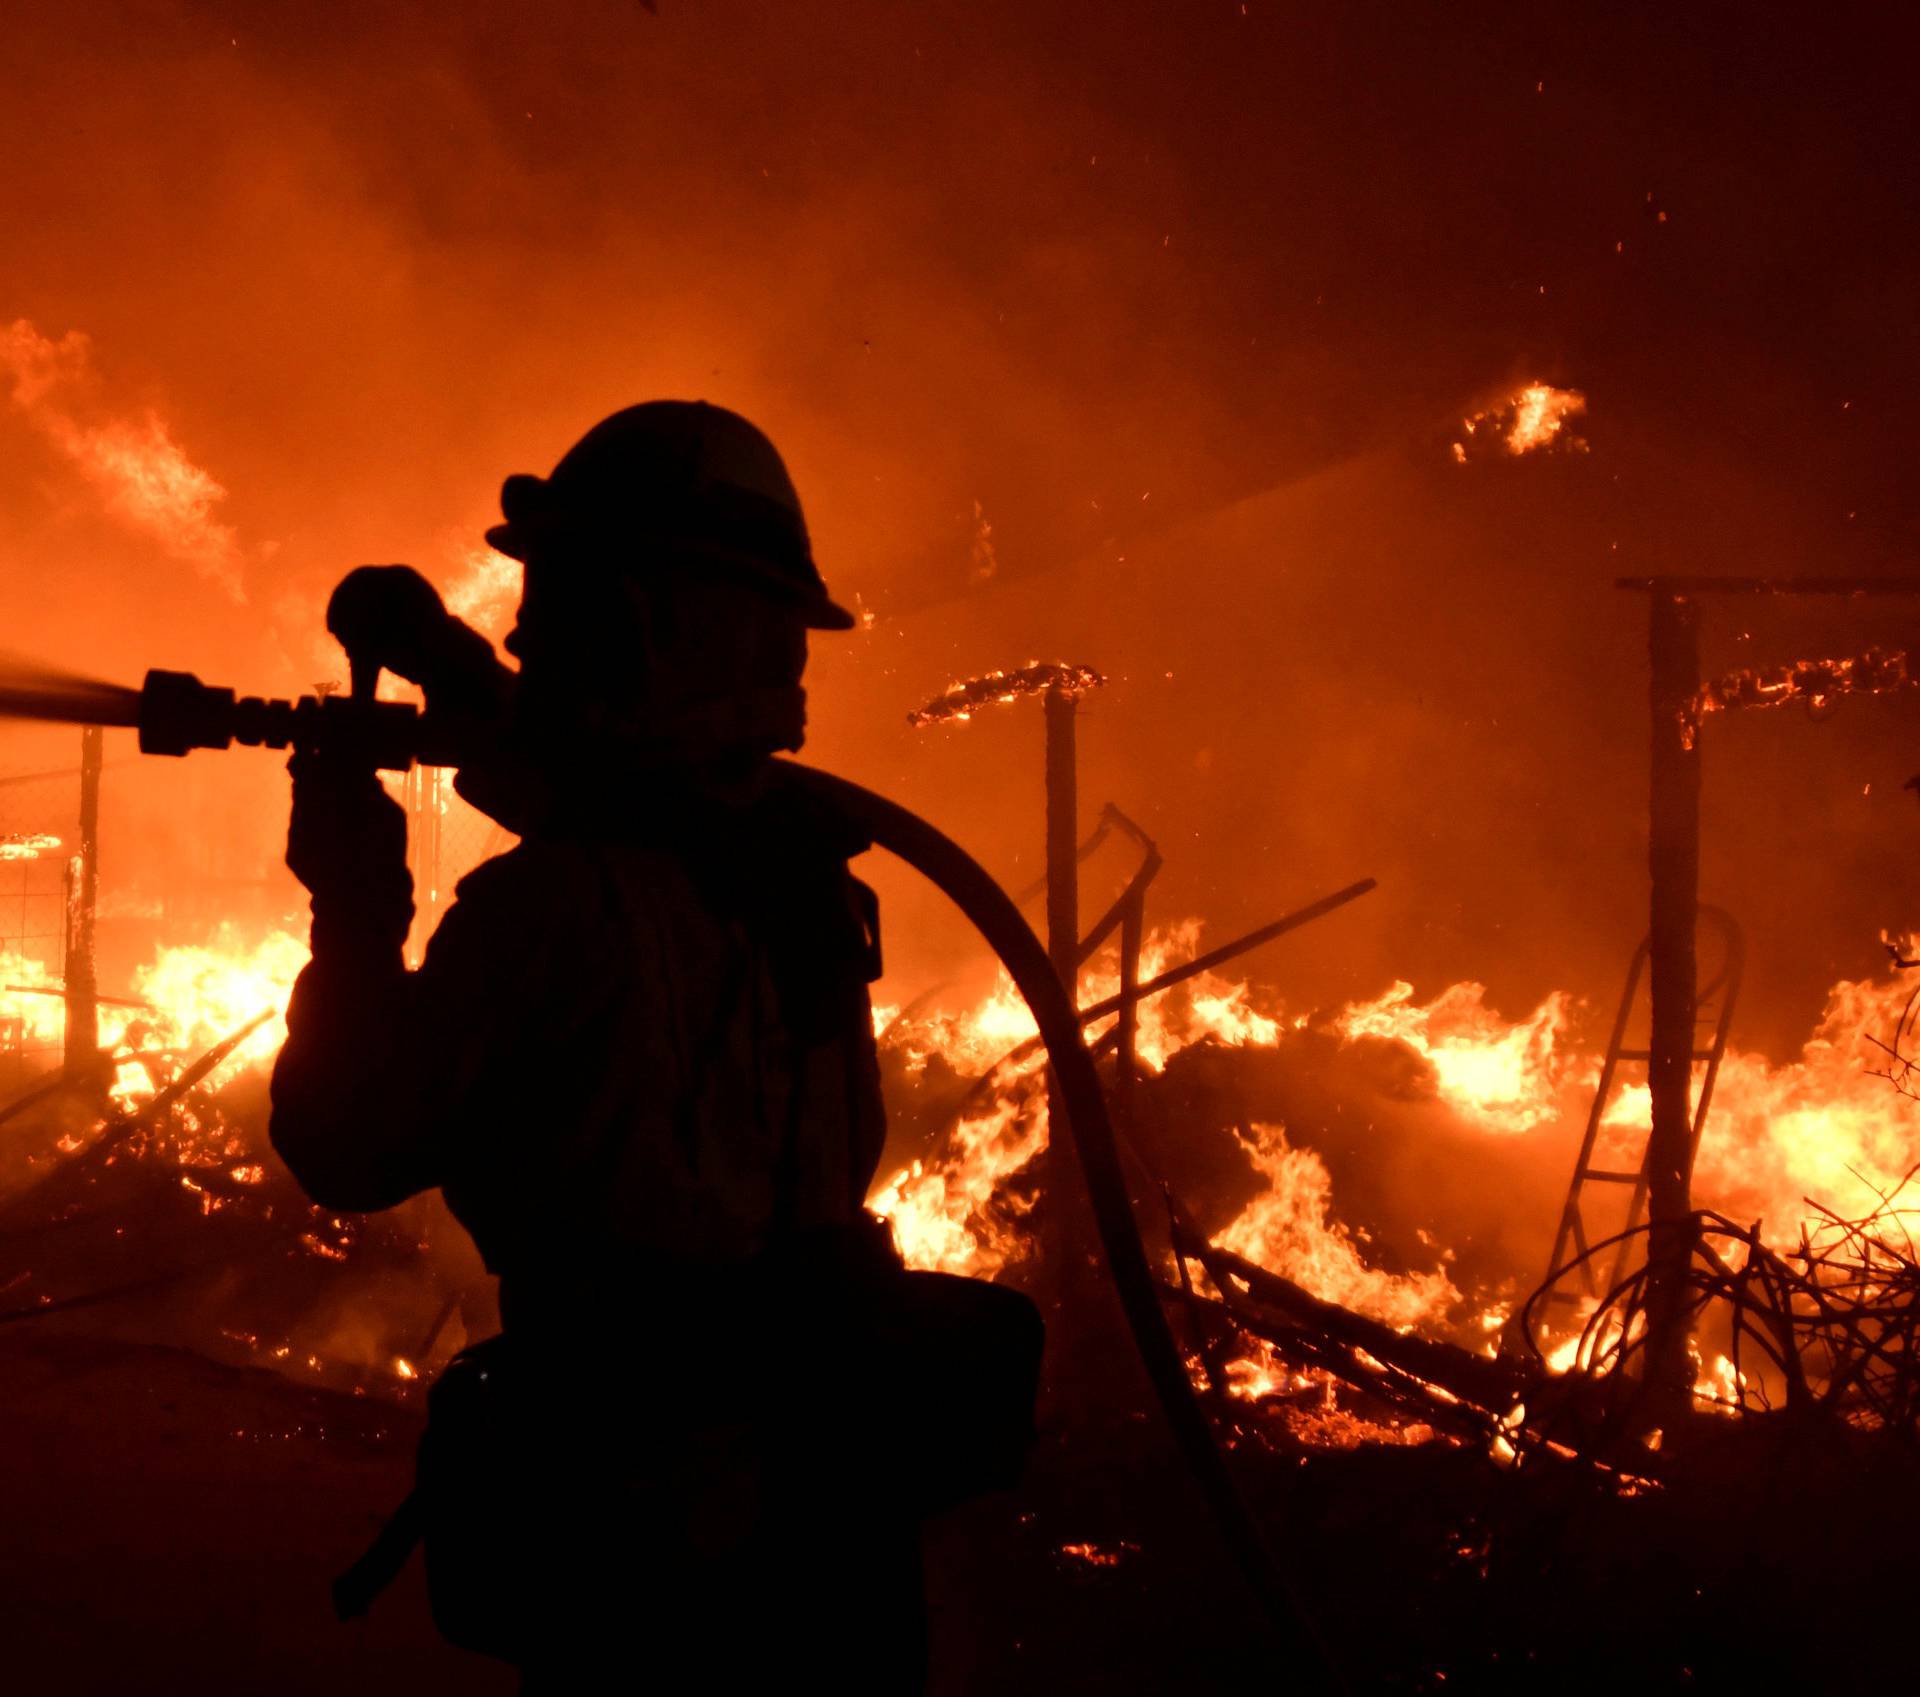 A firefighter hoses down a property engulfed in flames during the Woolsey Fire in Malibu